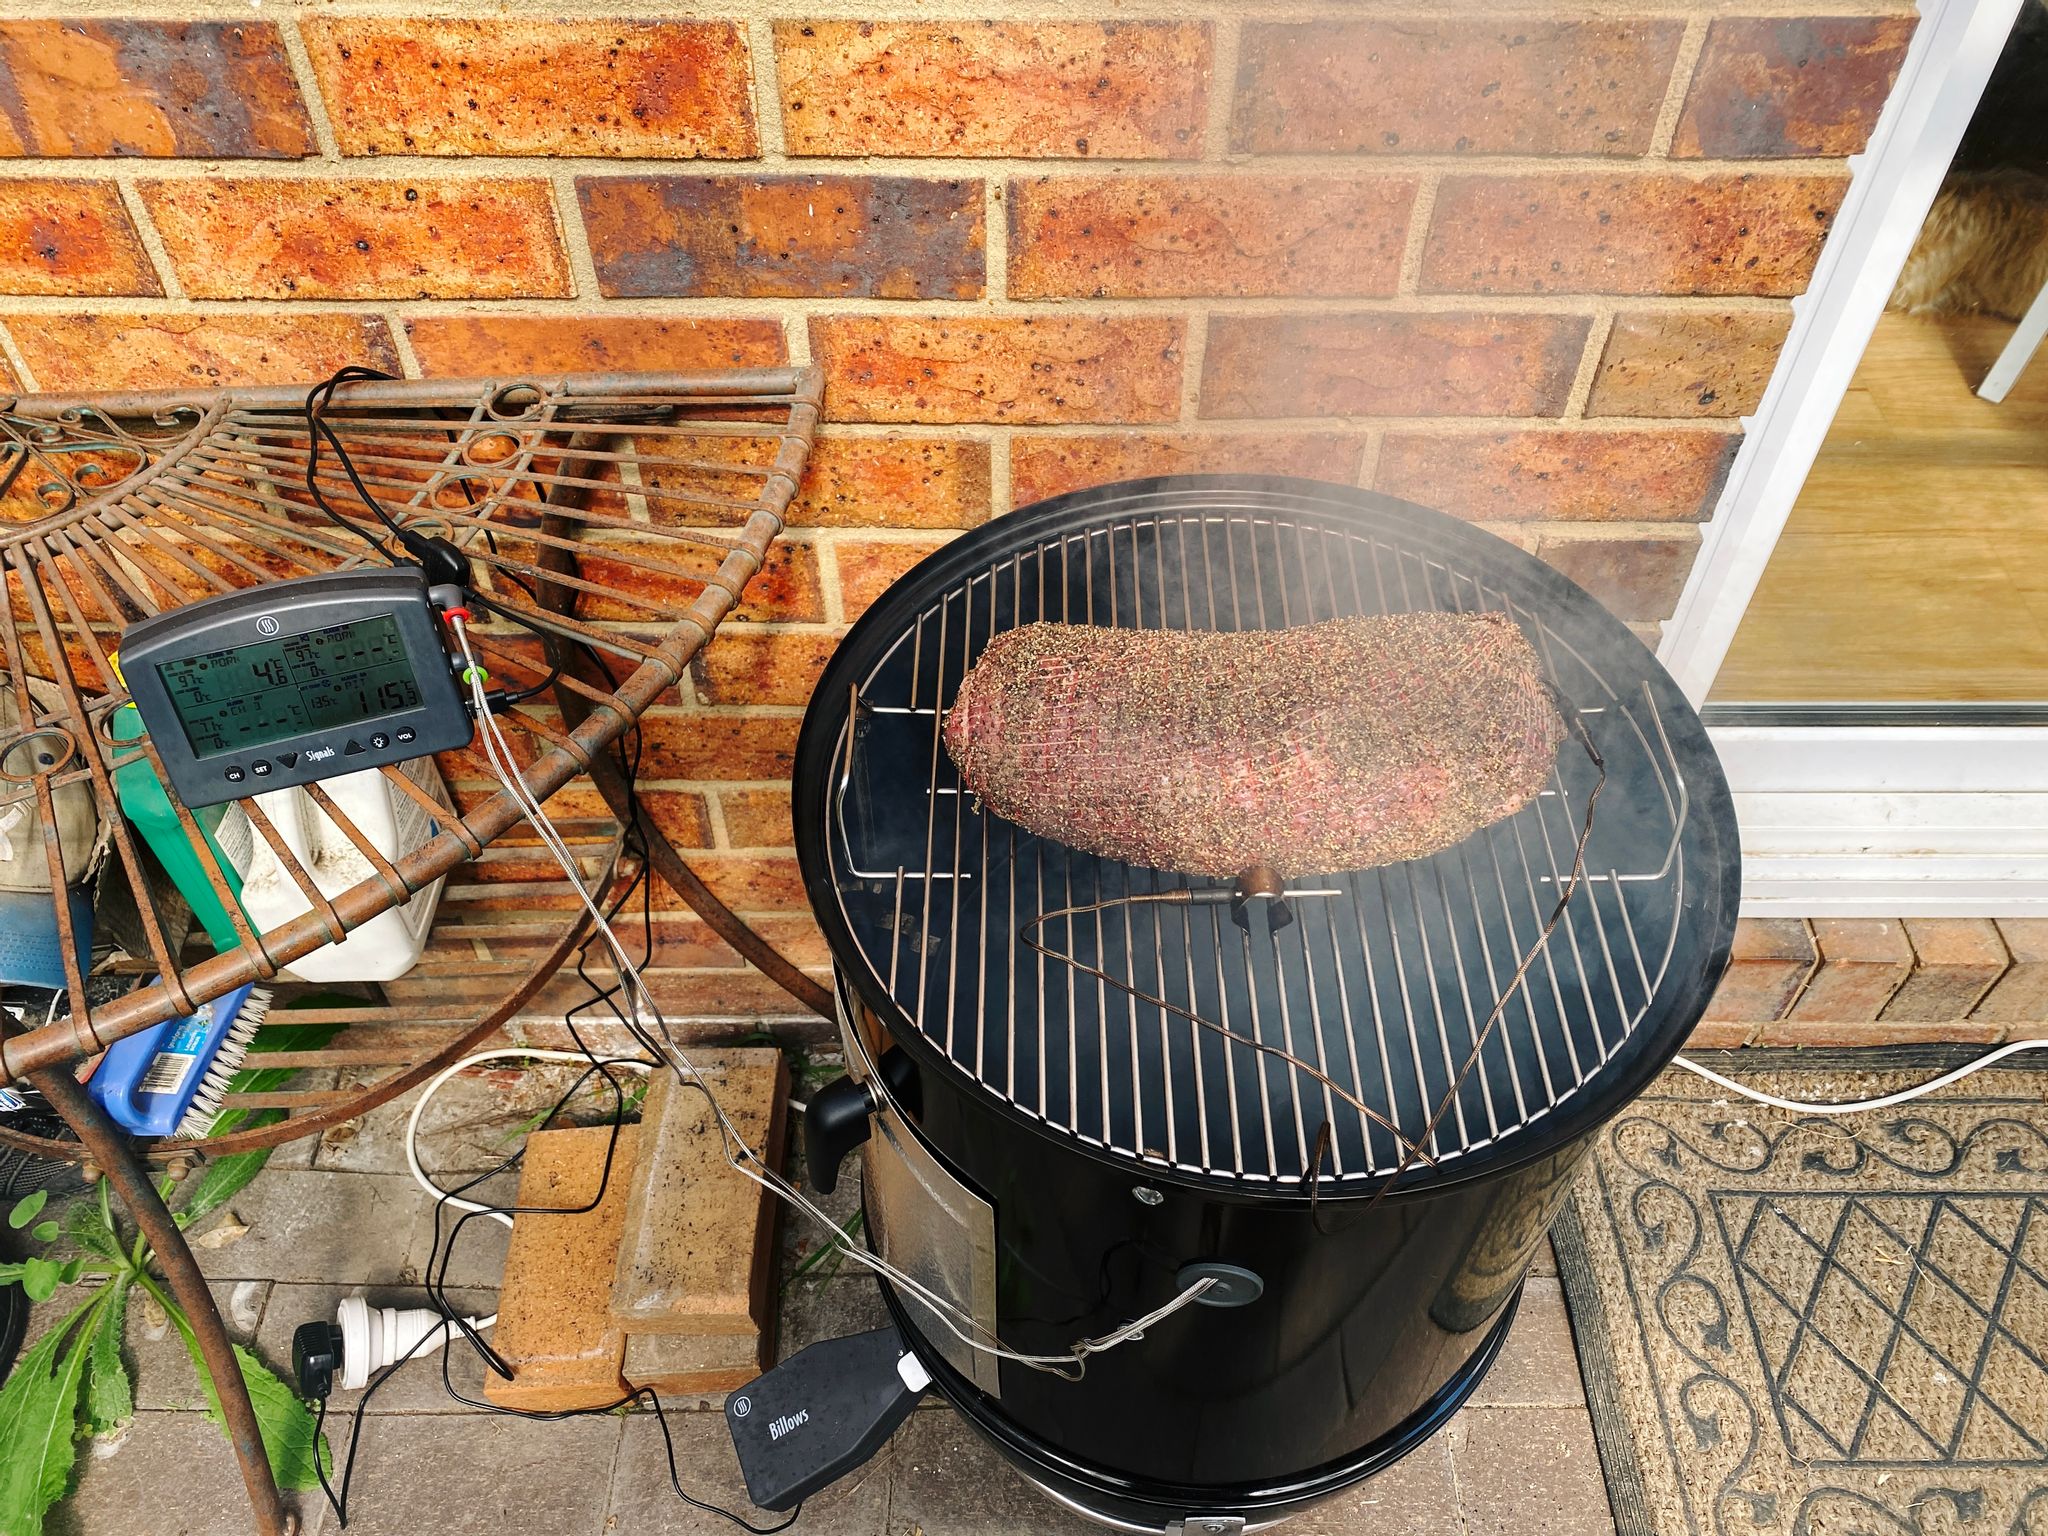 A photo of a pork collar butt sitting on a Weber Smokey Mountain smoker with smoke coming up from underneath. It has a temperature probe in it, and another to measure the ambient temperature inside the smoker.